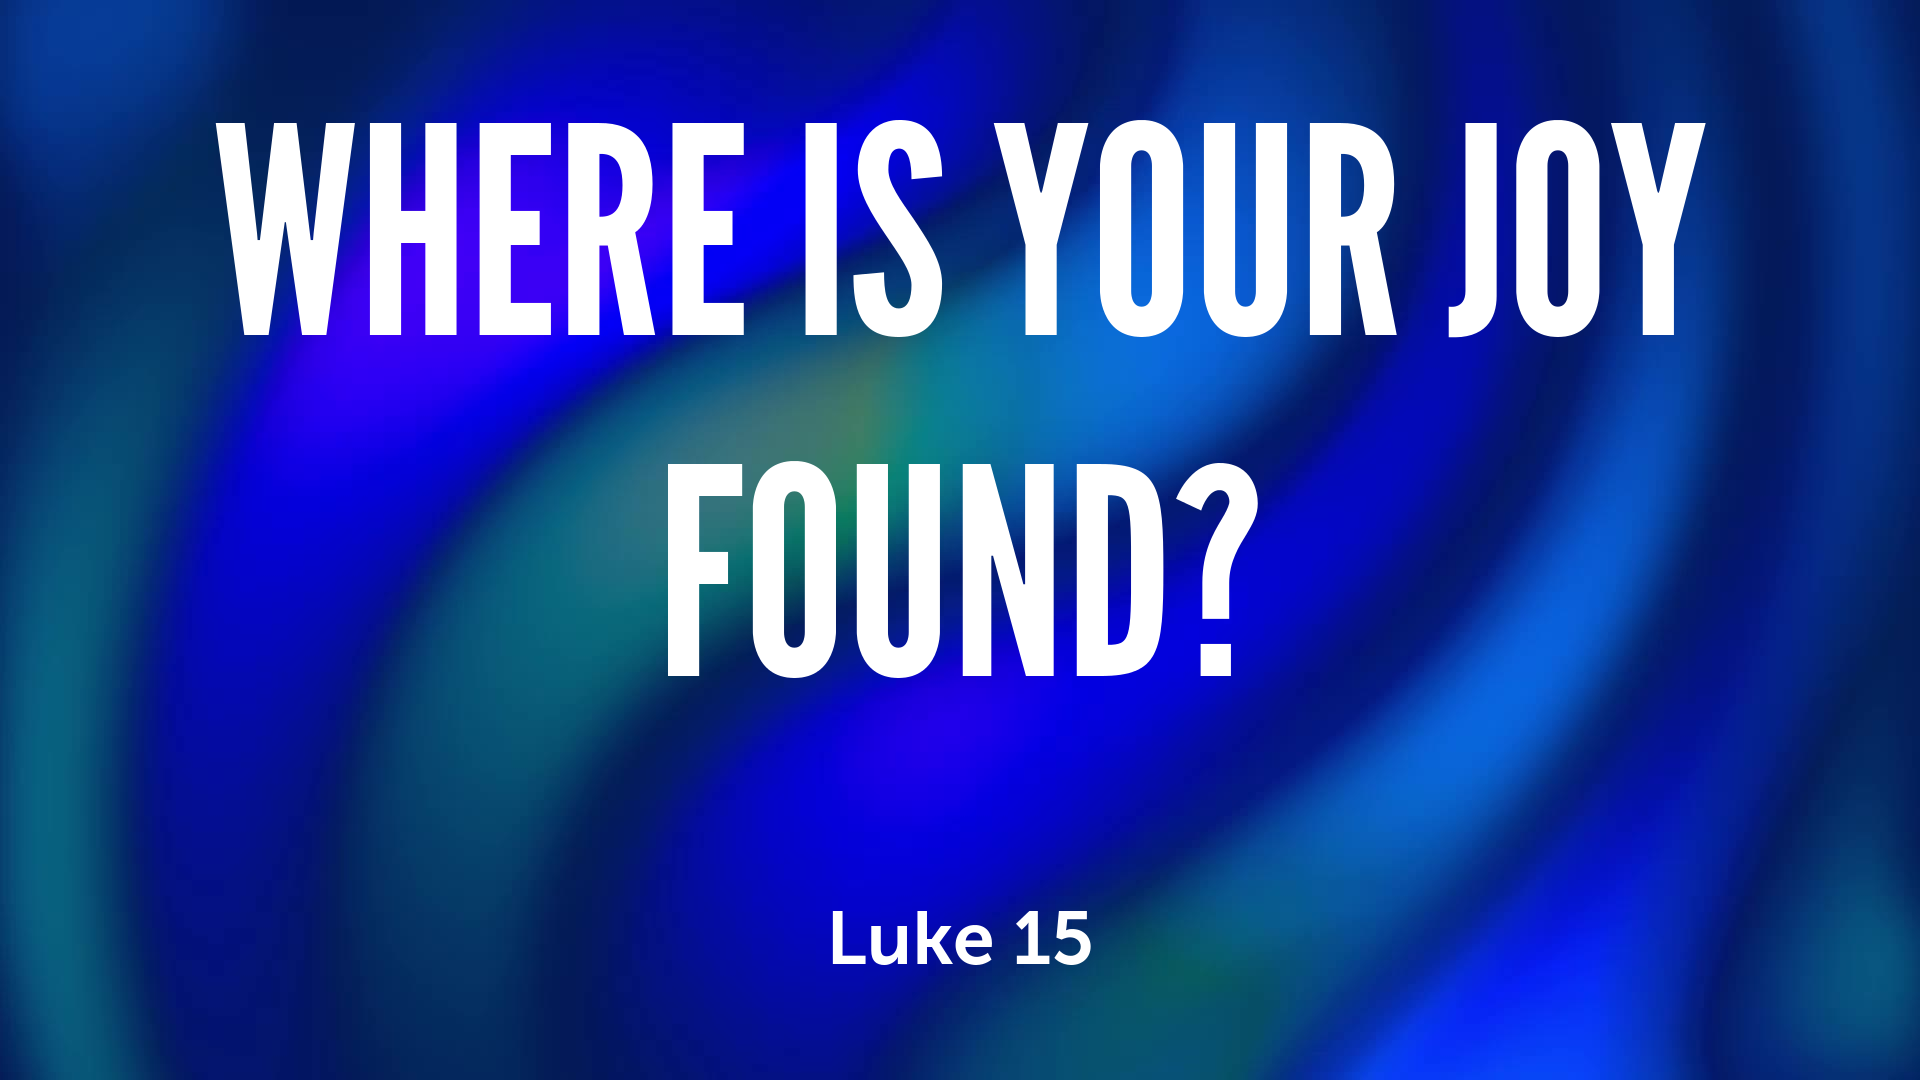 Where Is Your Joy Found?